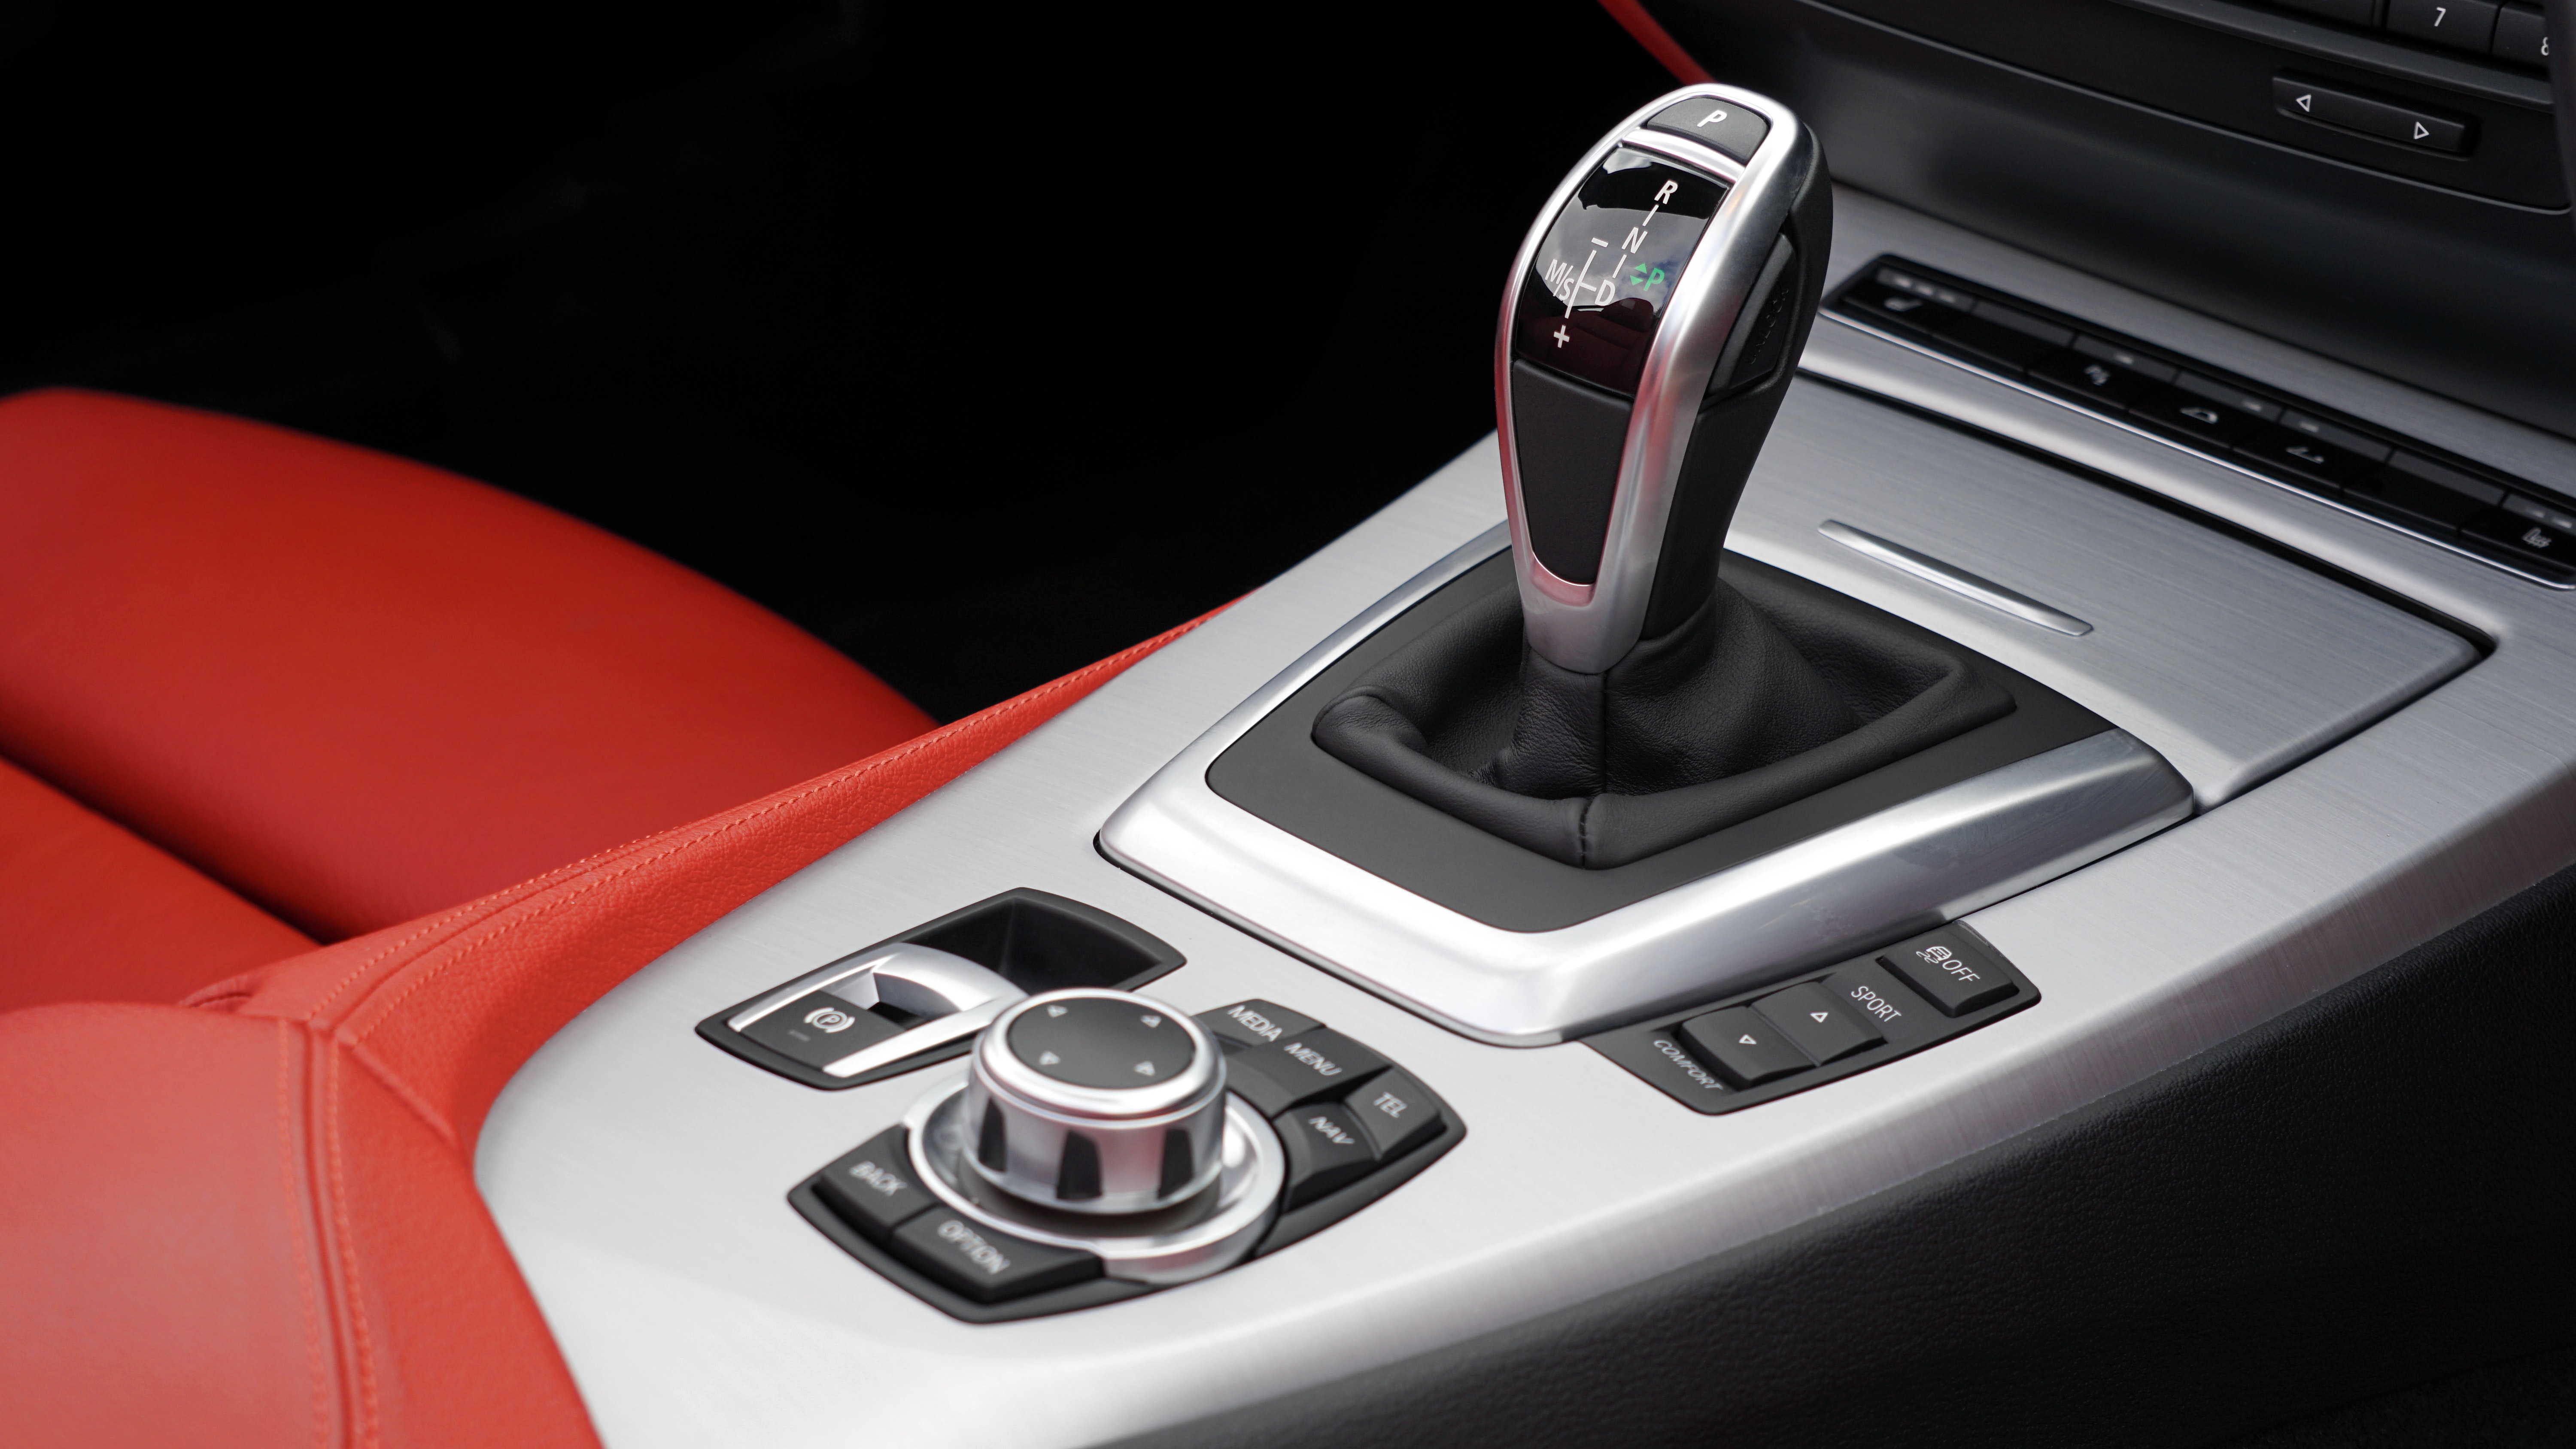 Close-up of Gear Shift over Black Background · Free Stock Photo